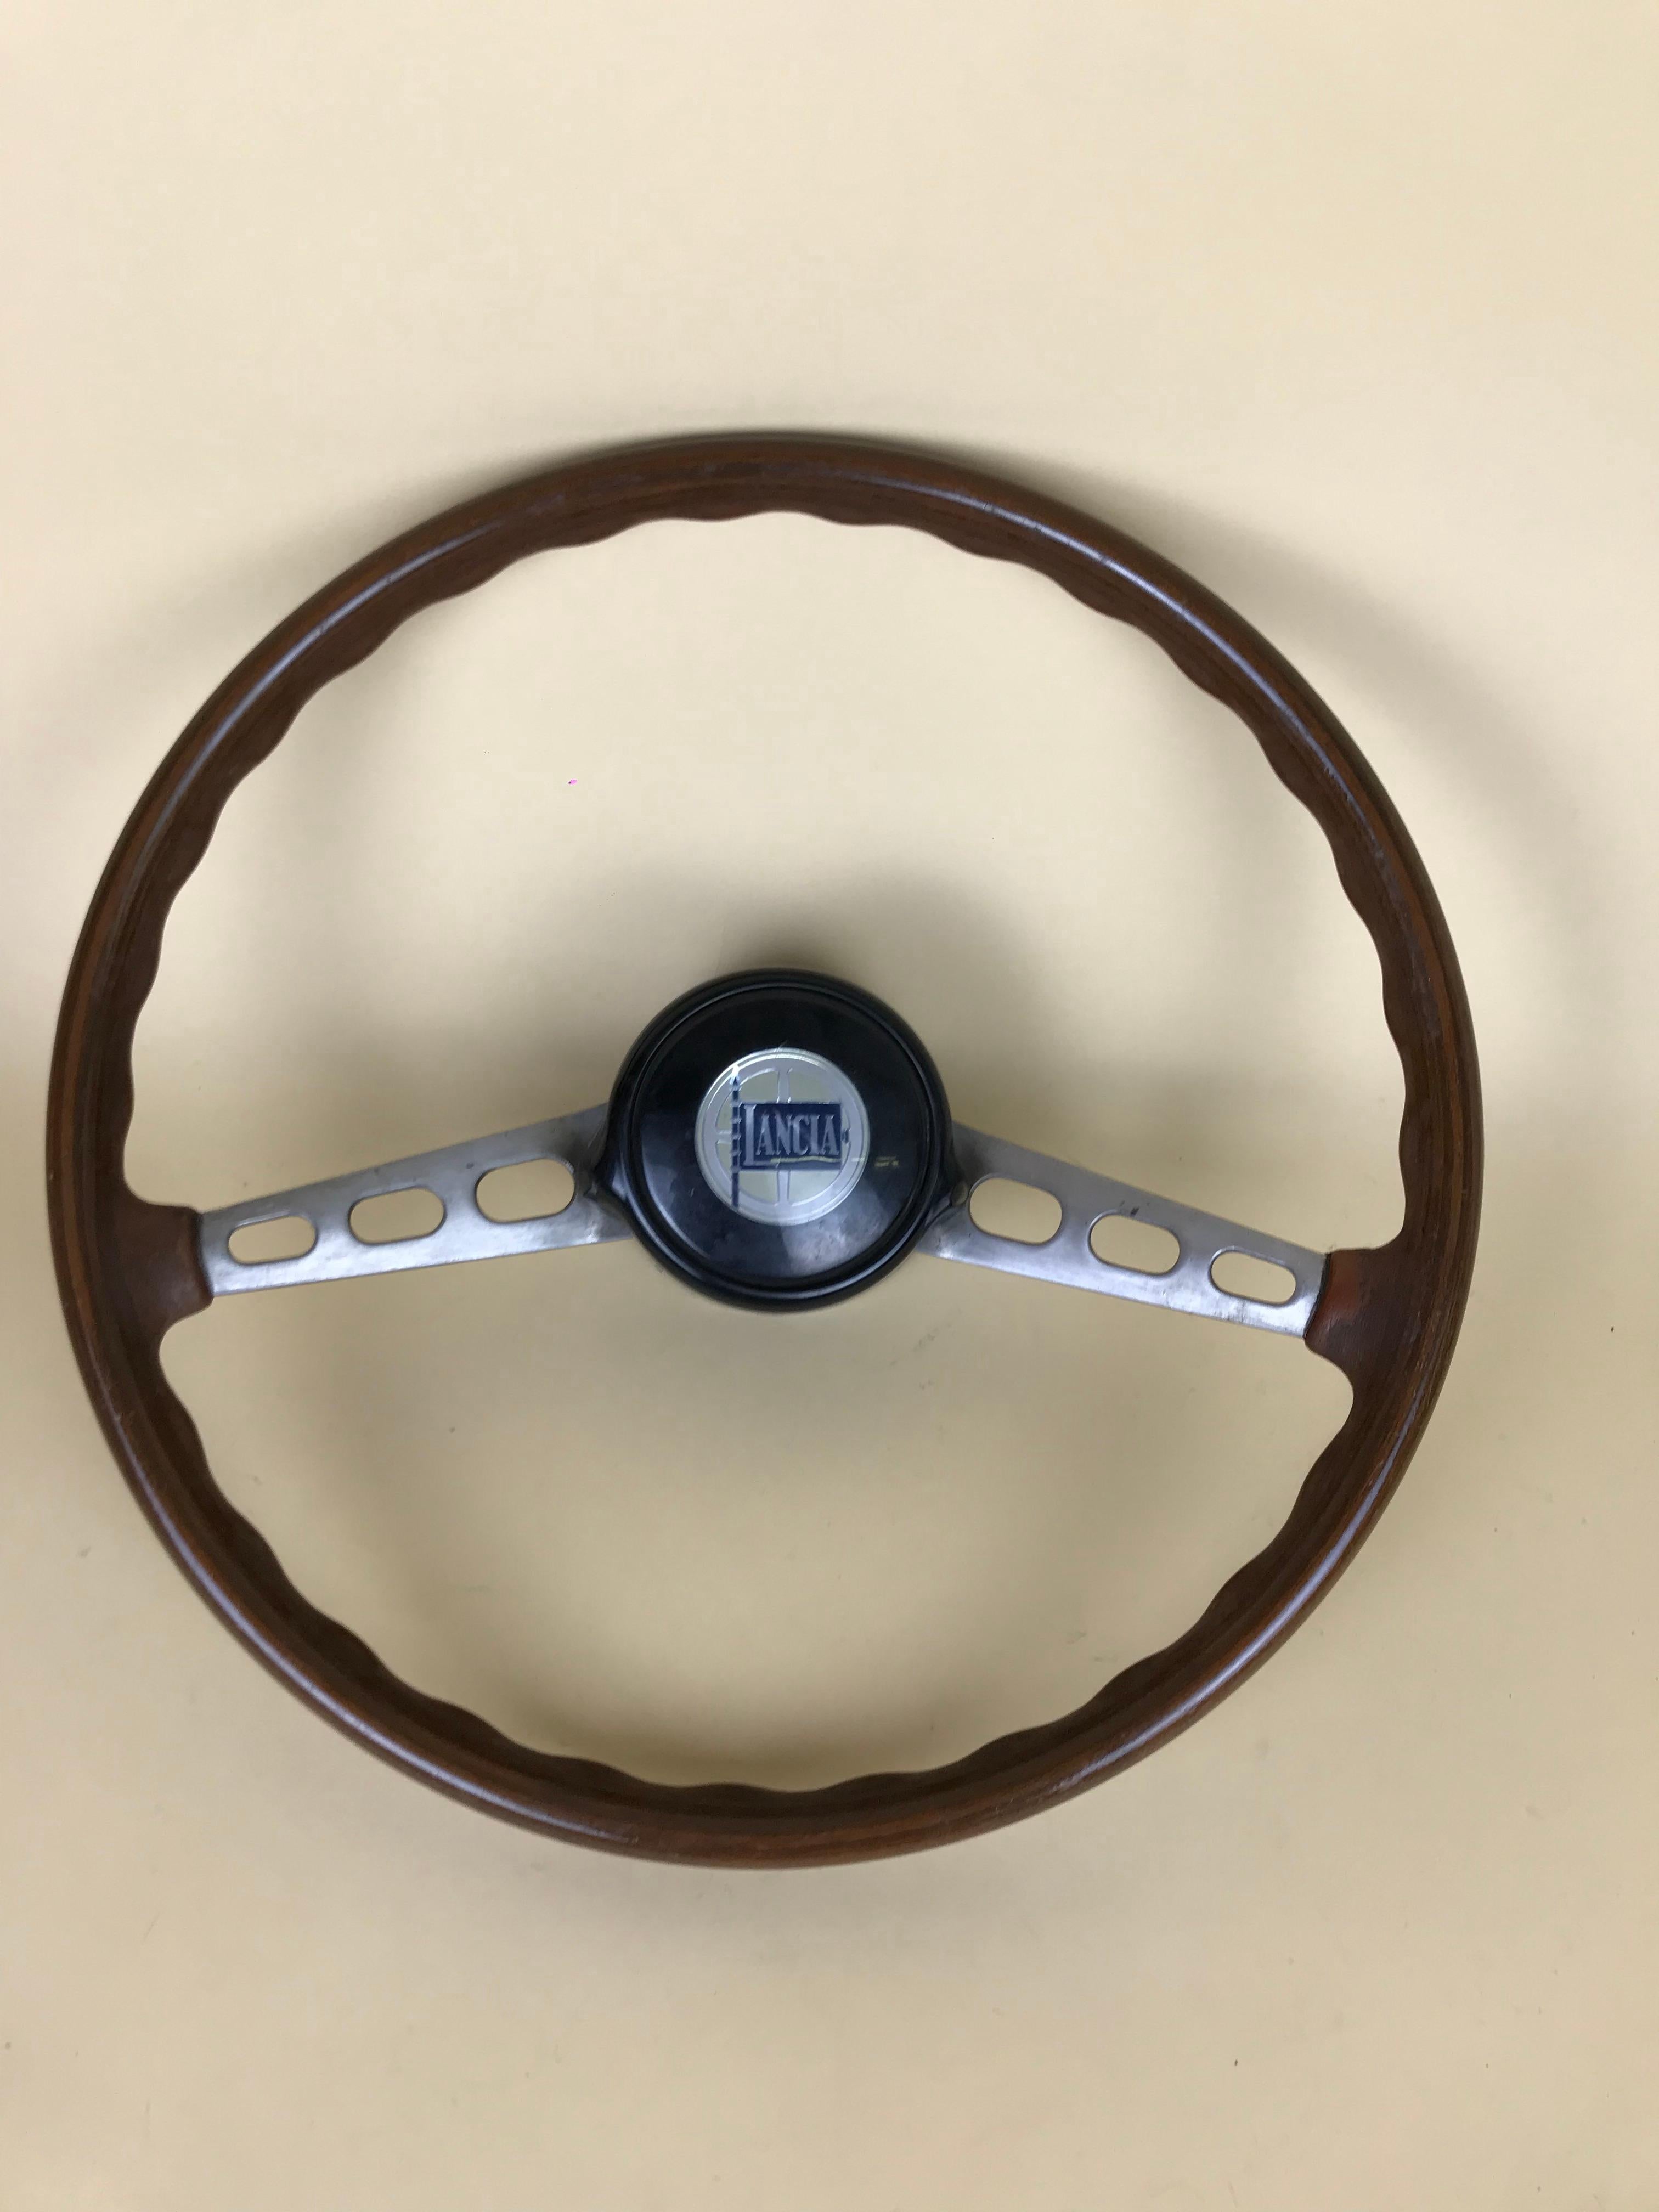 Italian 1960s Vintage Wooden and Metal Lancia Steering Wheel Made in Italy For Sale